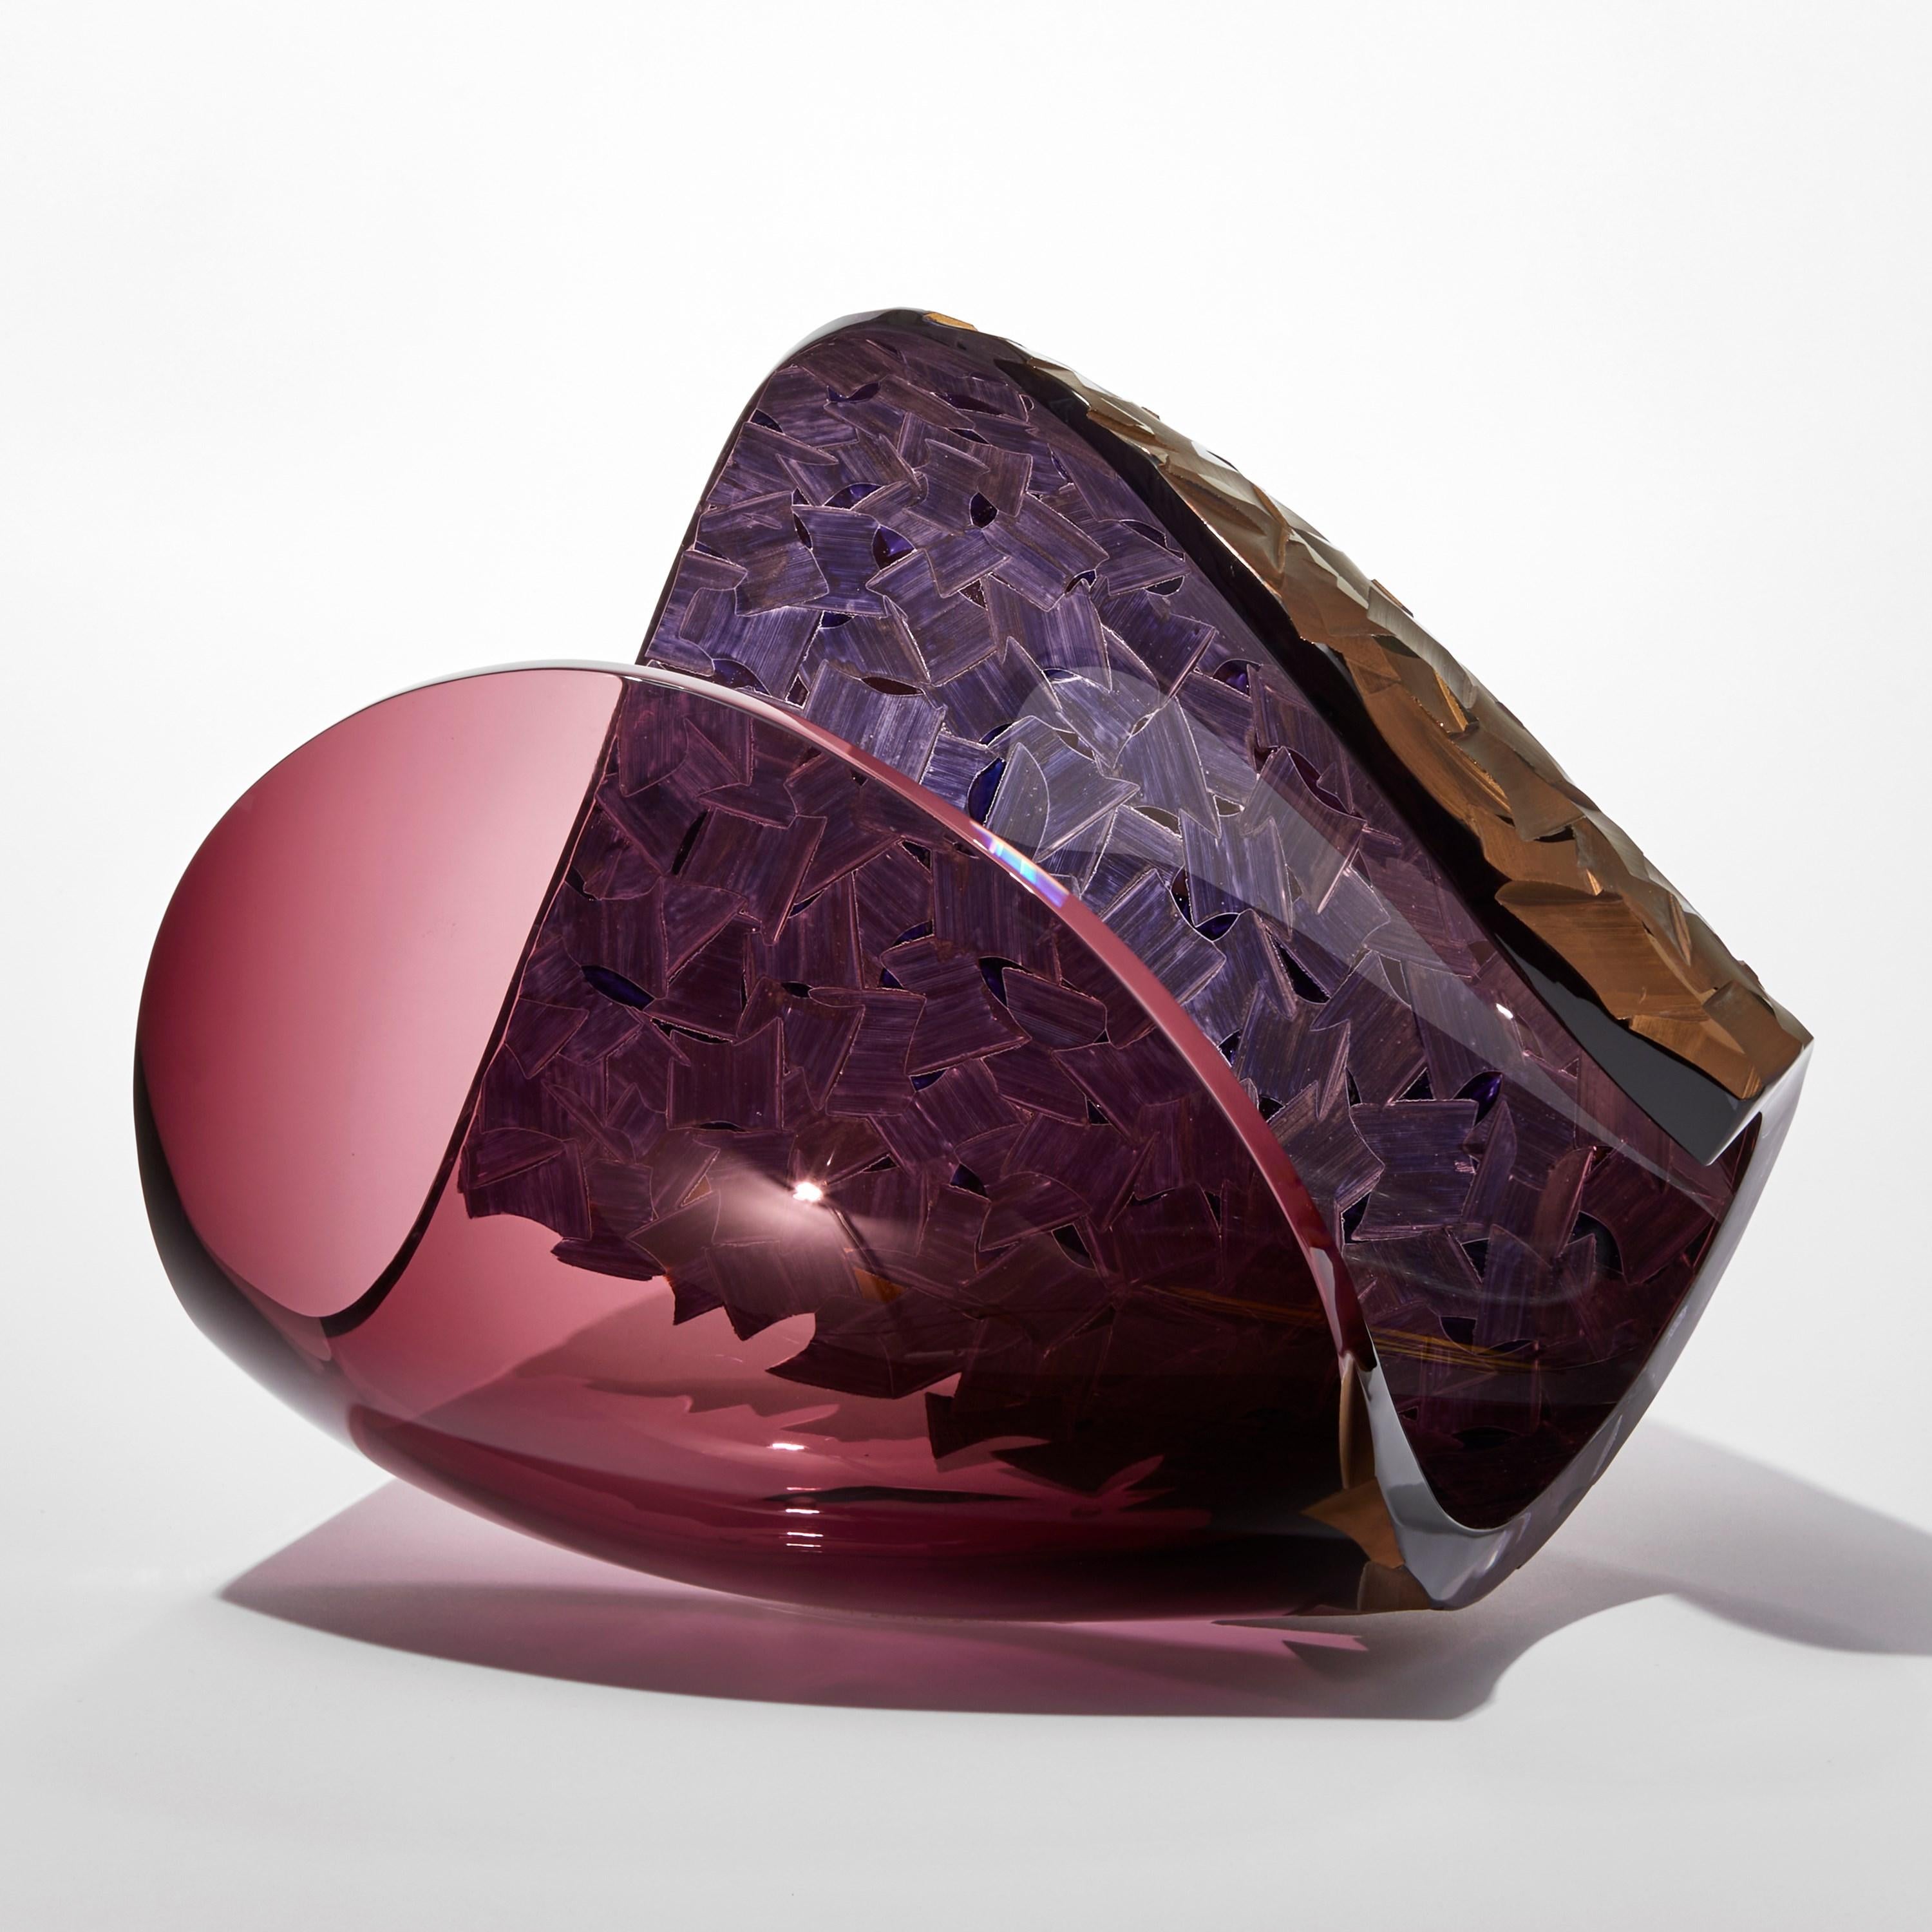 Hand-Crafted Planet in Burgundy Slate, aubergine & bronze glass sculpture by Lena Bergström For Sale